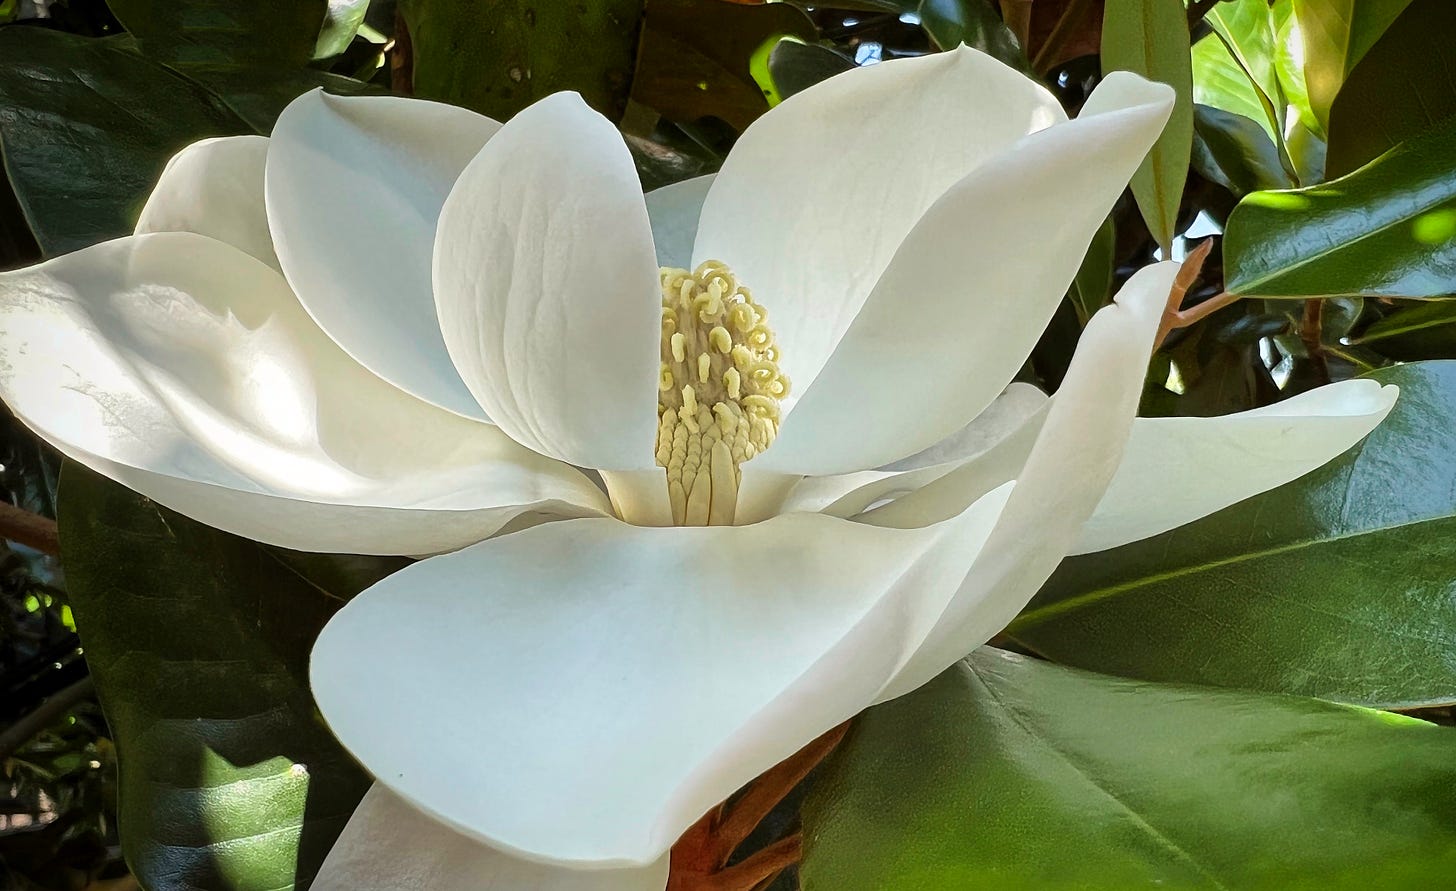 a single white Southern Magnolia blossom against its waxy green leaves